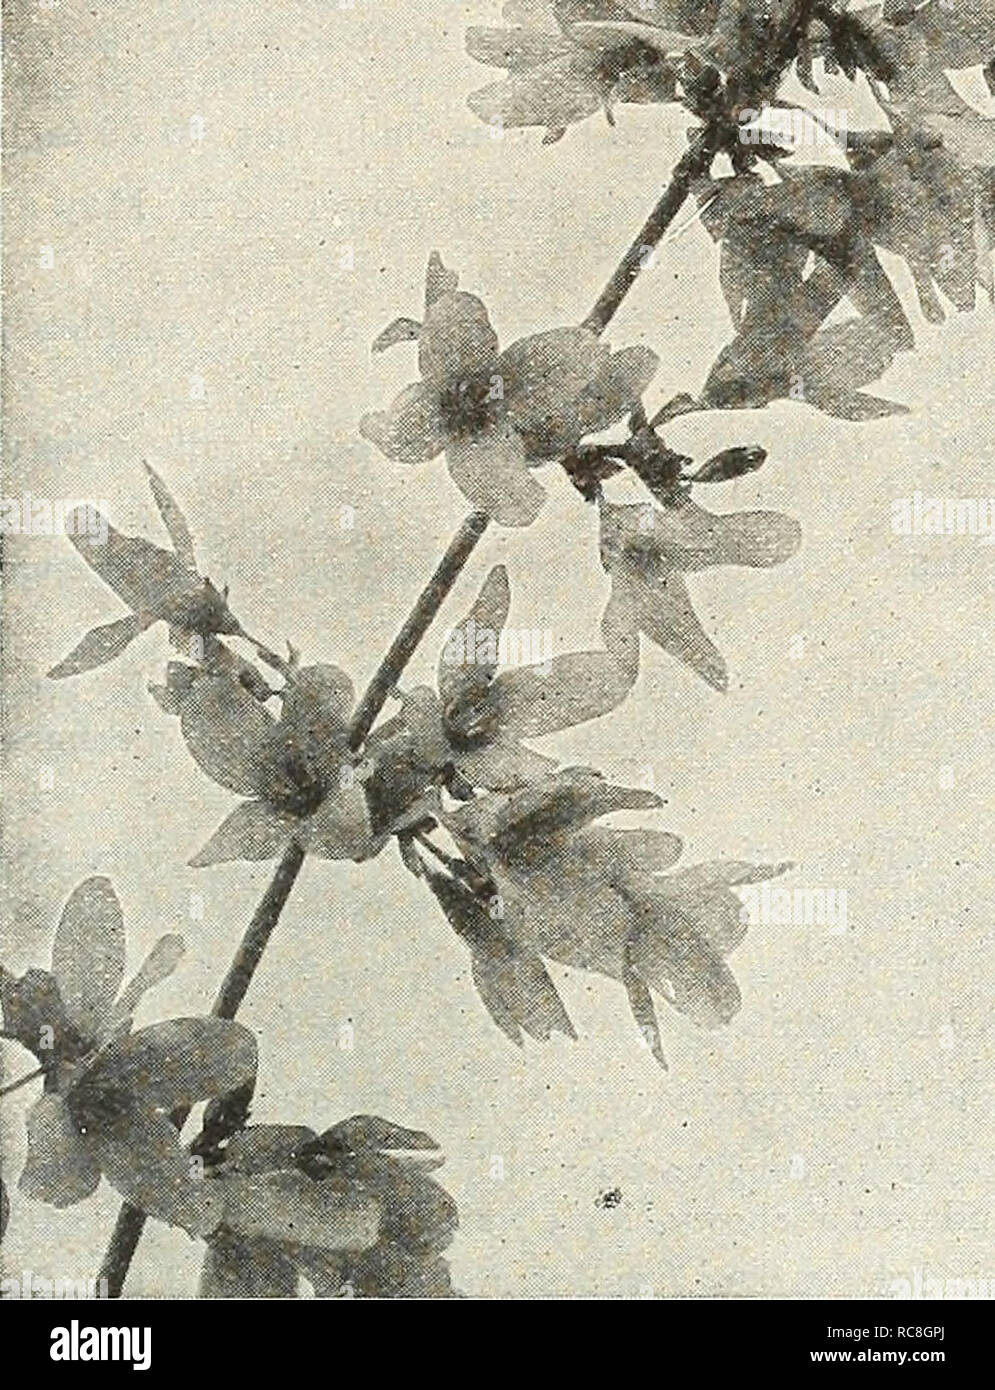 . Dreer's garden book 1928. Seeds Catalogs; Nursery stock Catalogs; Gardening Equipment and supplies Catalogs; Flowers Seeds Catalogs; Vegetables Seeds Catalogs; Fruit Seeds Catalogs. p1KXA.IÂ« â CHOKE HARDY SHRUBS I 209 g Tt 4L.*.. Euonymus Alata (Corkbark). A shrub different in character from others, having an individuality of its own. It is particu- larly ornamental and interesting on account of its curious corky bark. The small flowers of the spring are followed by attrac- tive red berries in the fall. It is also valuable on account of its bright scarlet autumn foliage which makes it ver Stock Photo